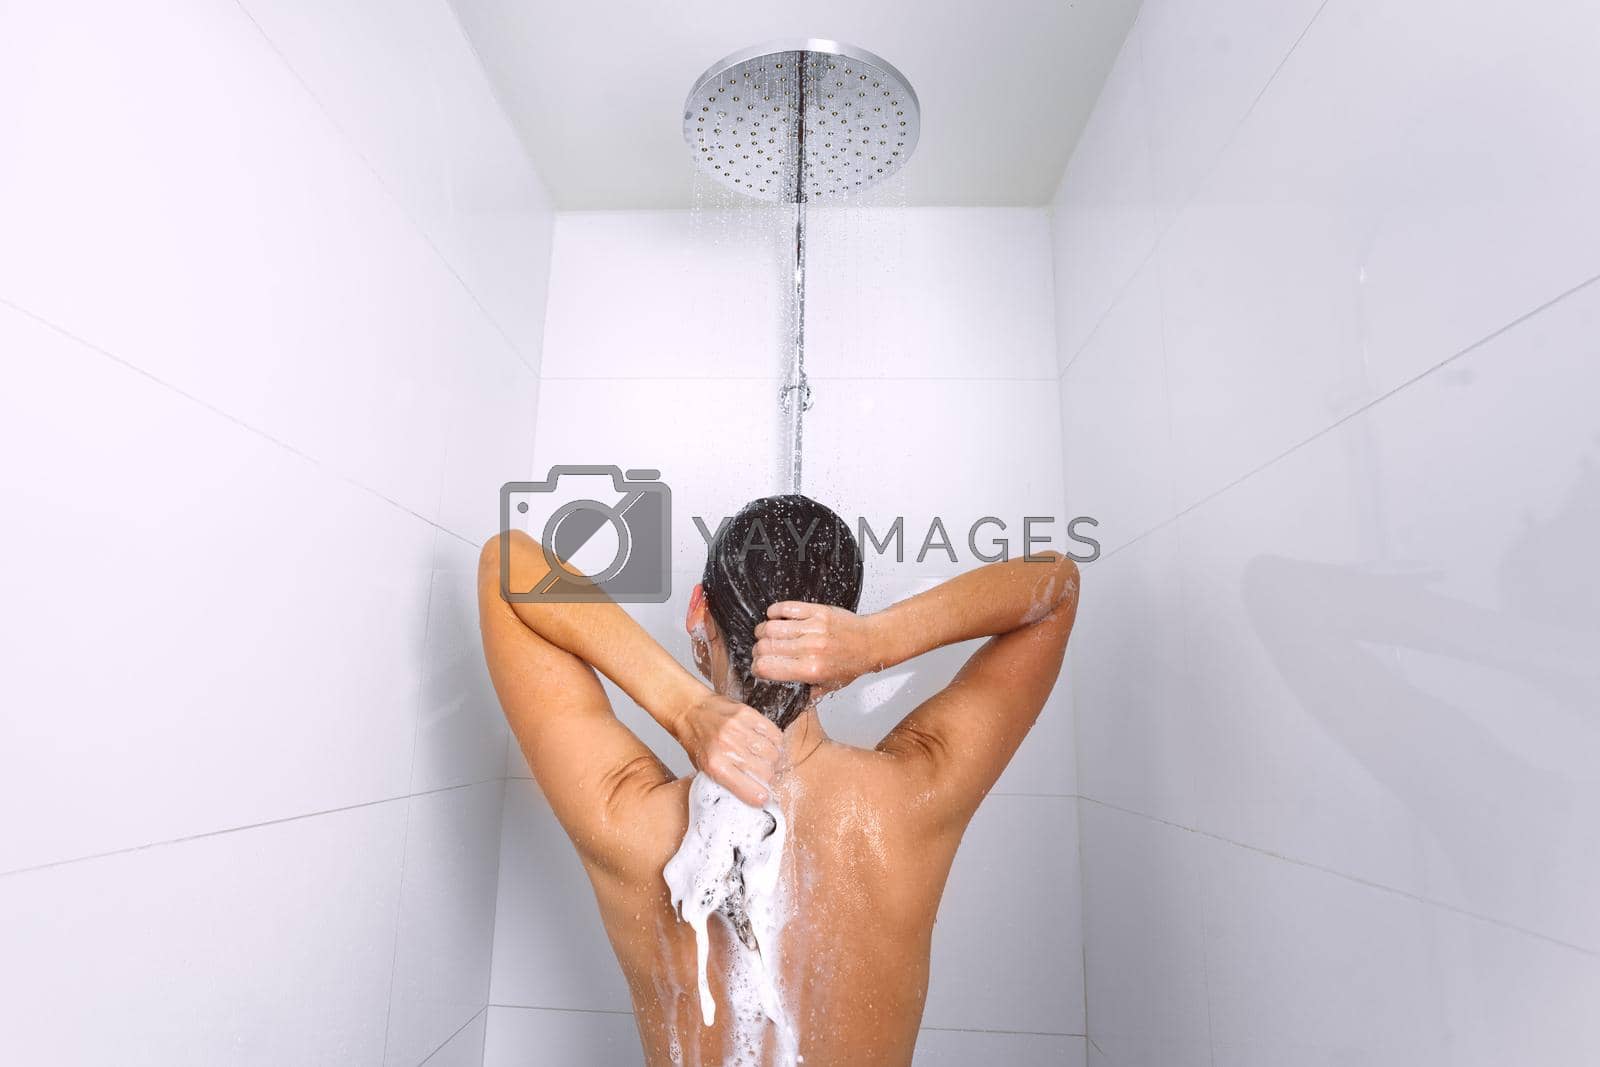 Royalty free image of Rear view of young woman taking shower and washing hair with shampoo under water falling from rain shower head by DariaKulkova